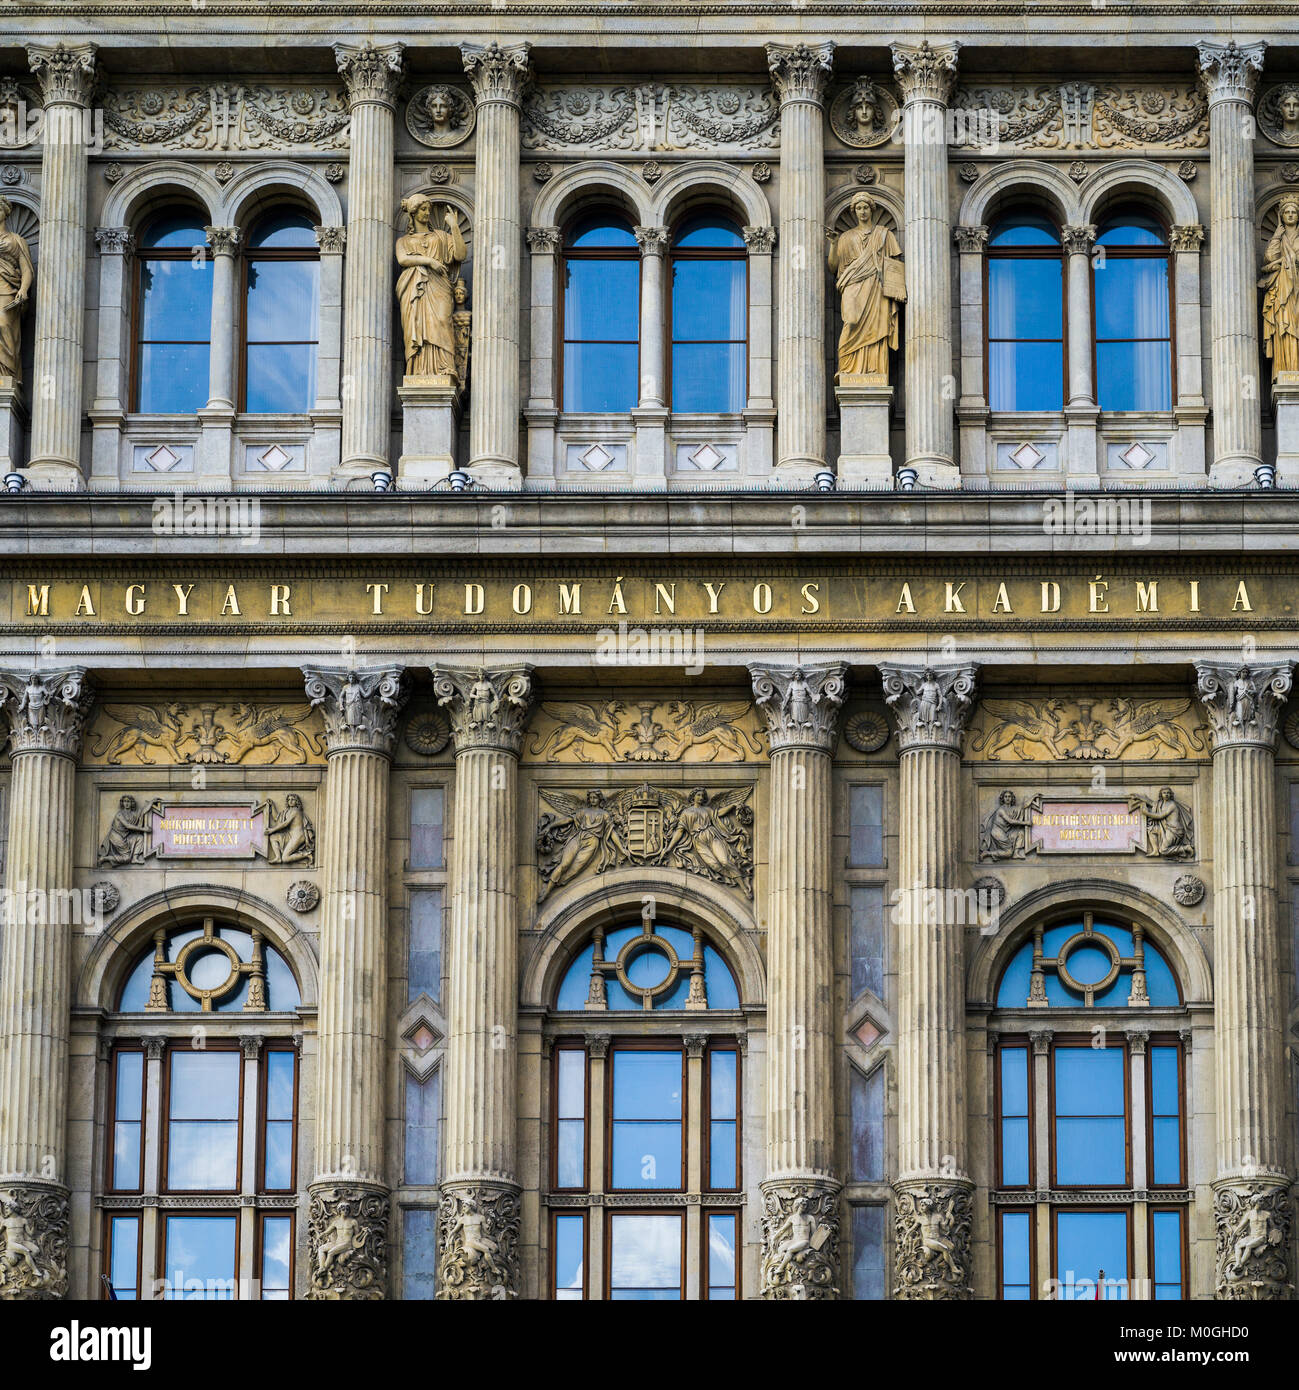 Ornate facade of a building with pillars and statues beside windows with reflection of the blue sky; Budapest, Budapest, Hungary Stock Photo